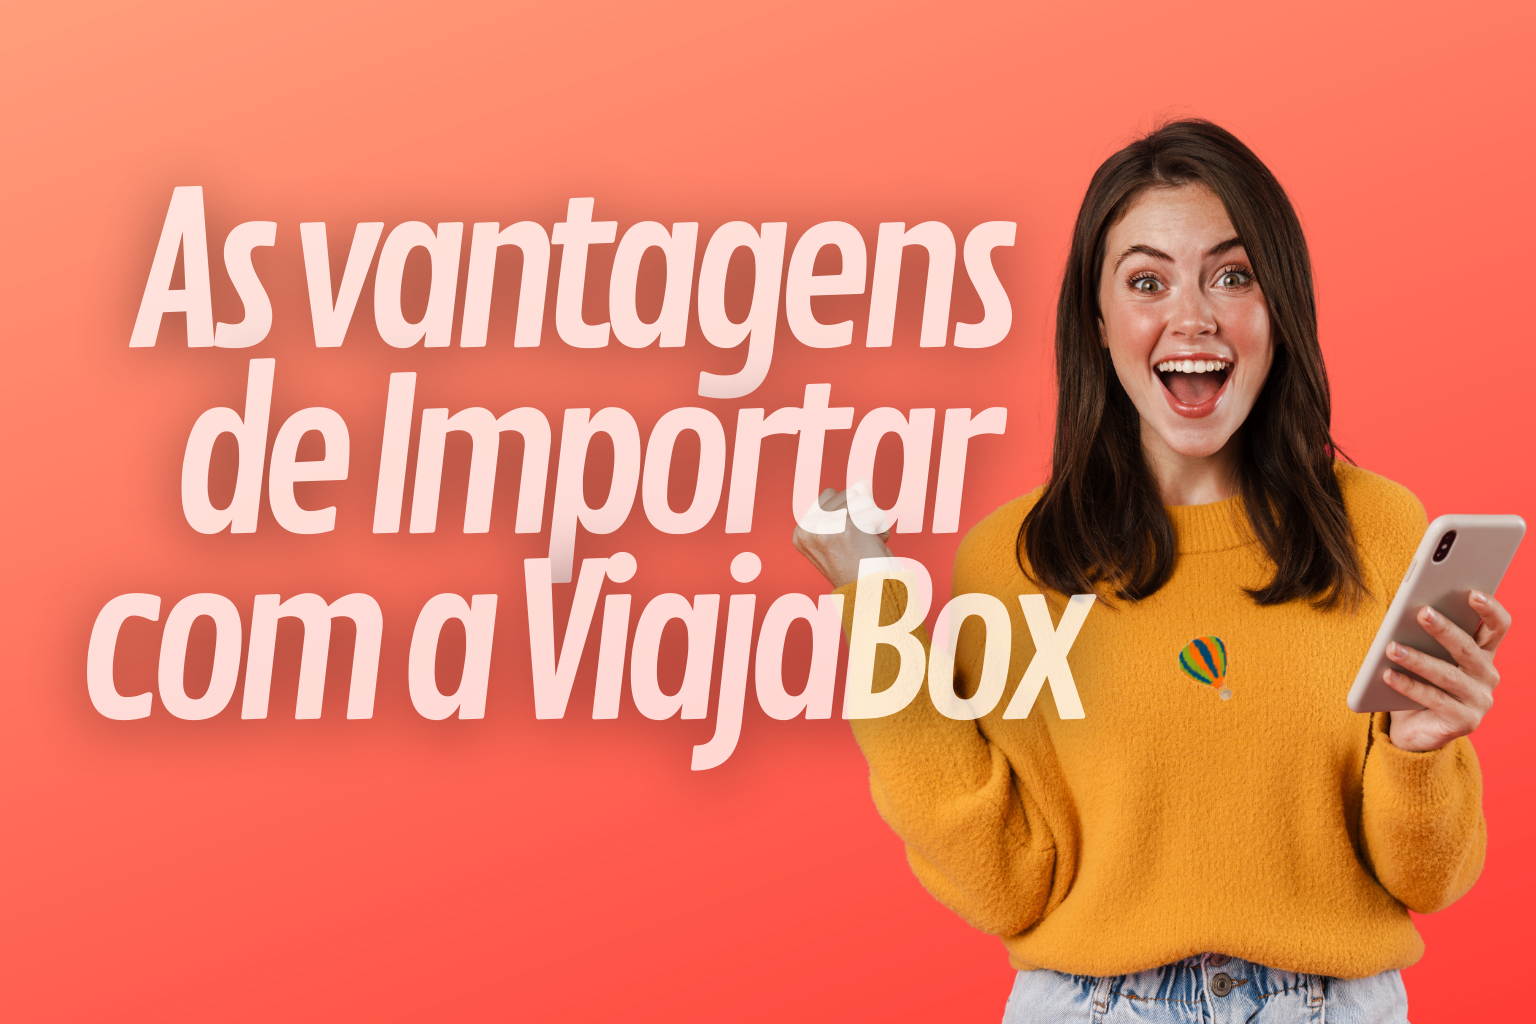 How to import from the USA safely and easily with only one Viajabox account